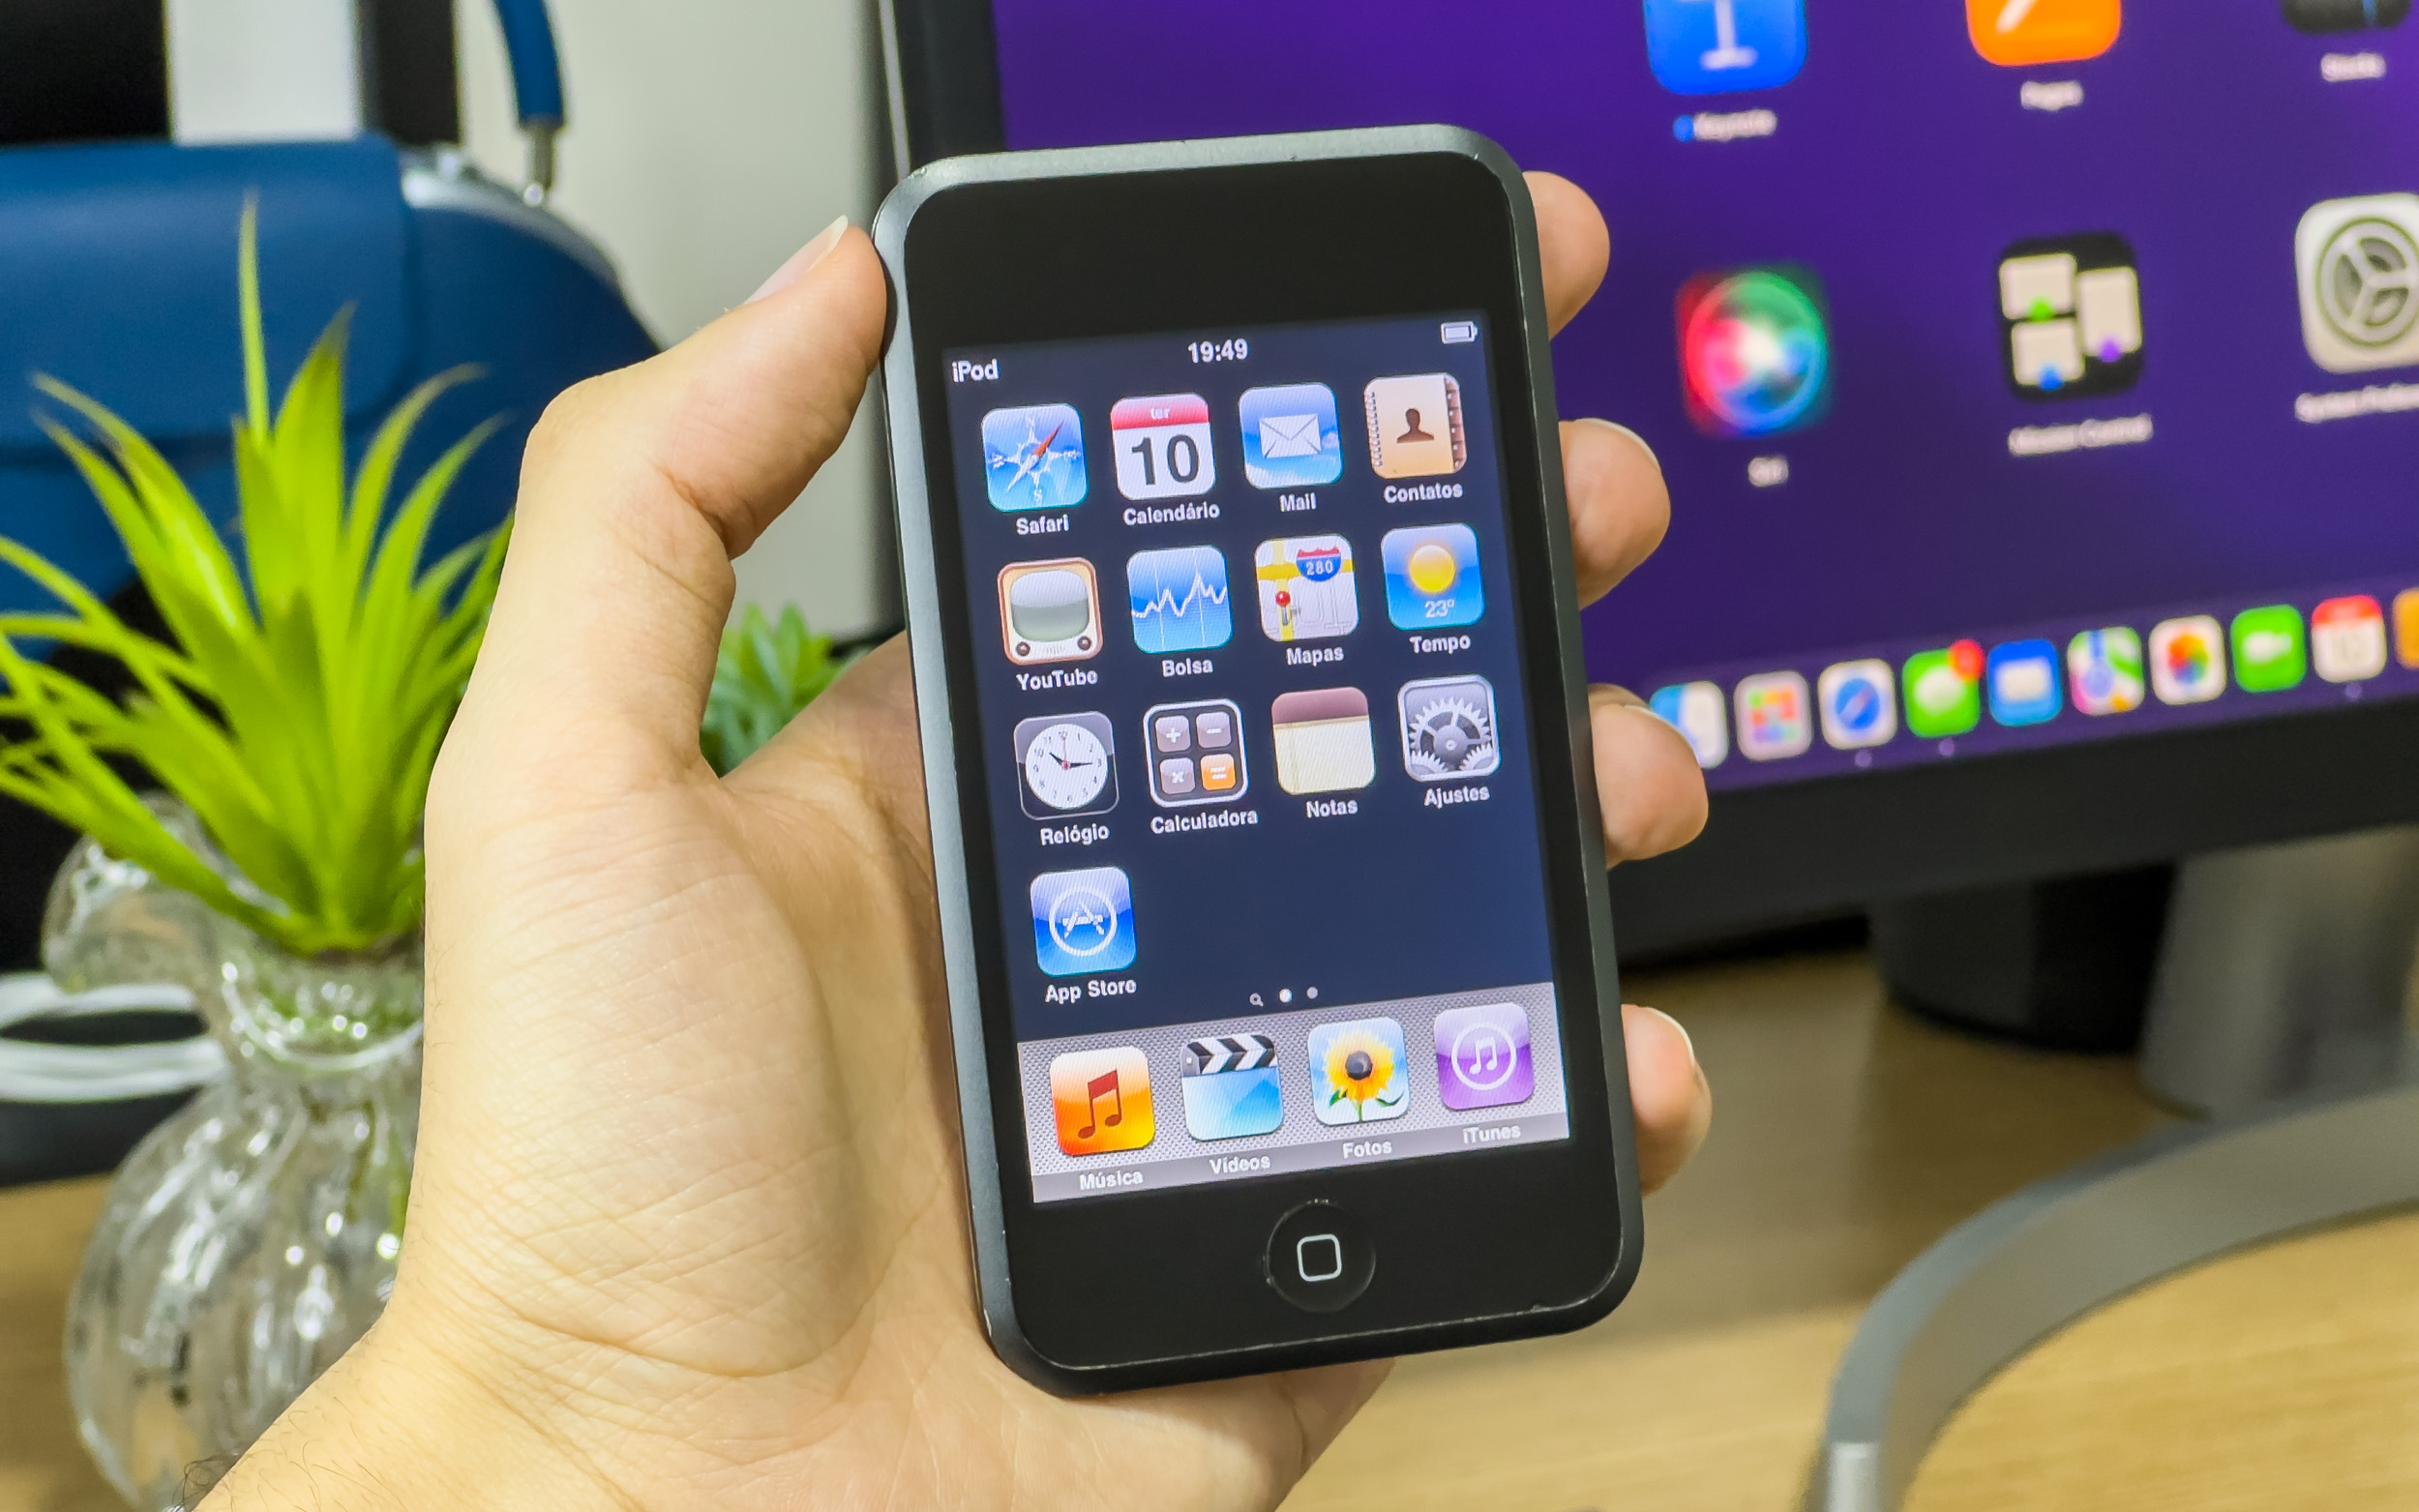 bod dosis Stijg iPod touch was once the gateway to the iOS ecosystem - 9to5Mac